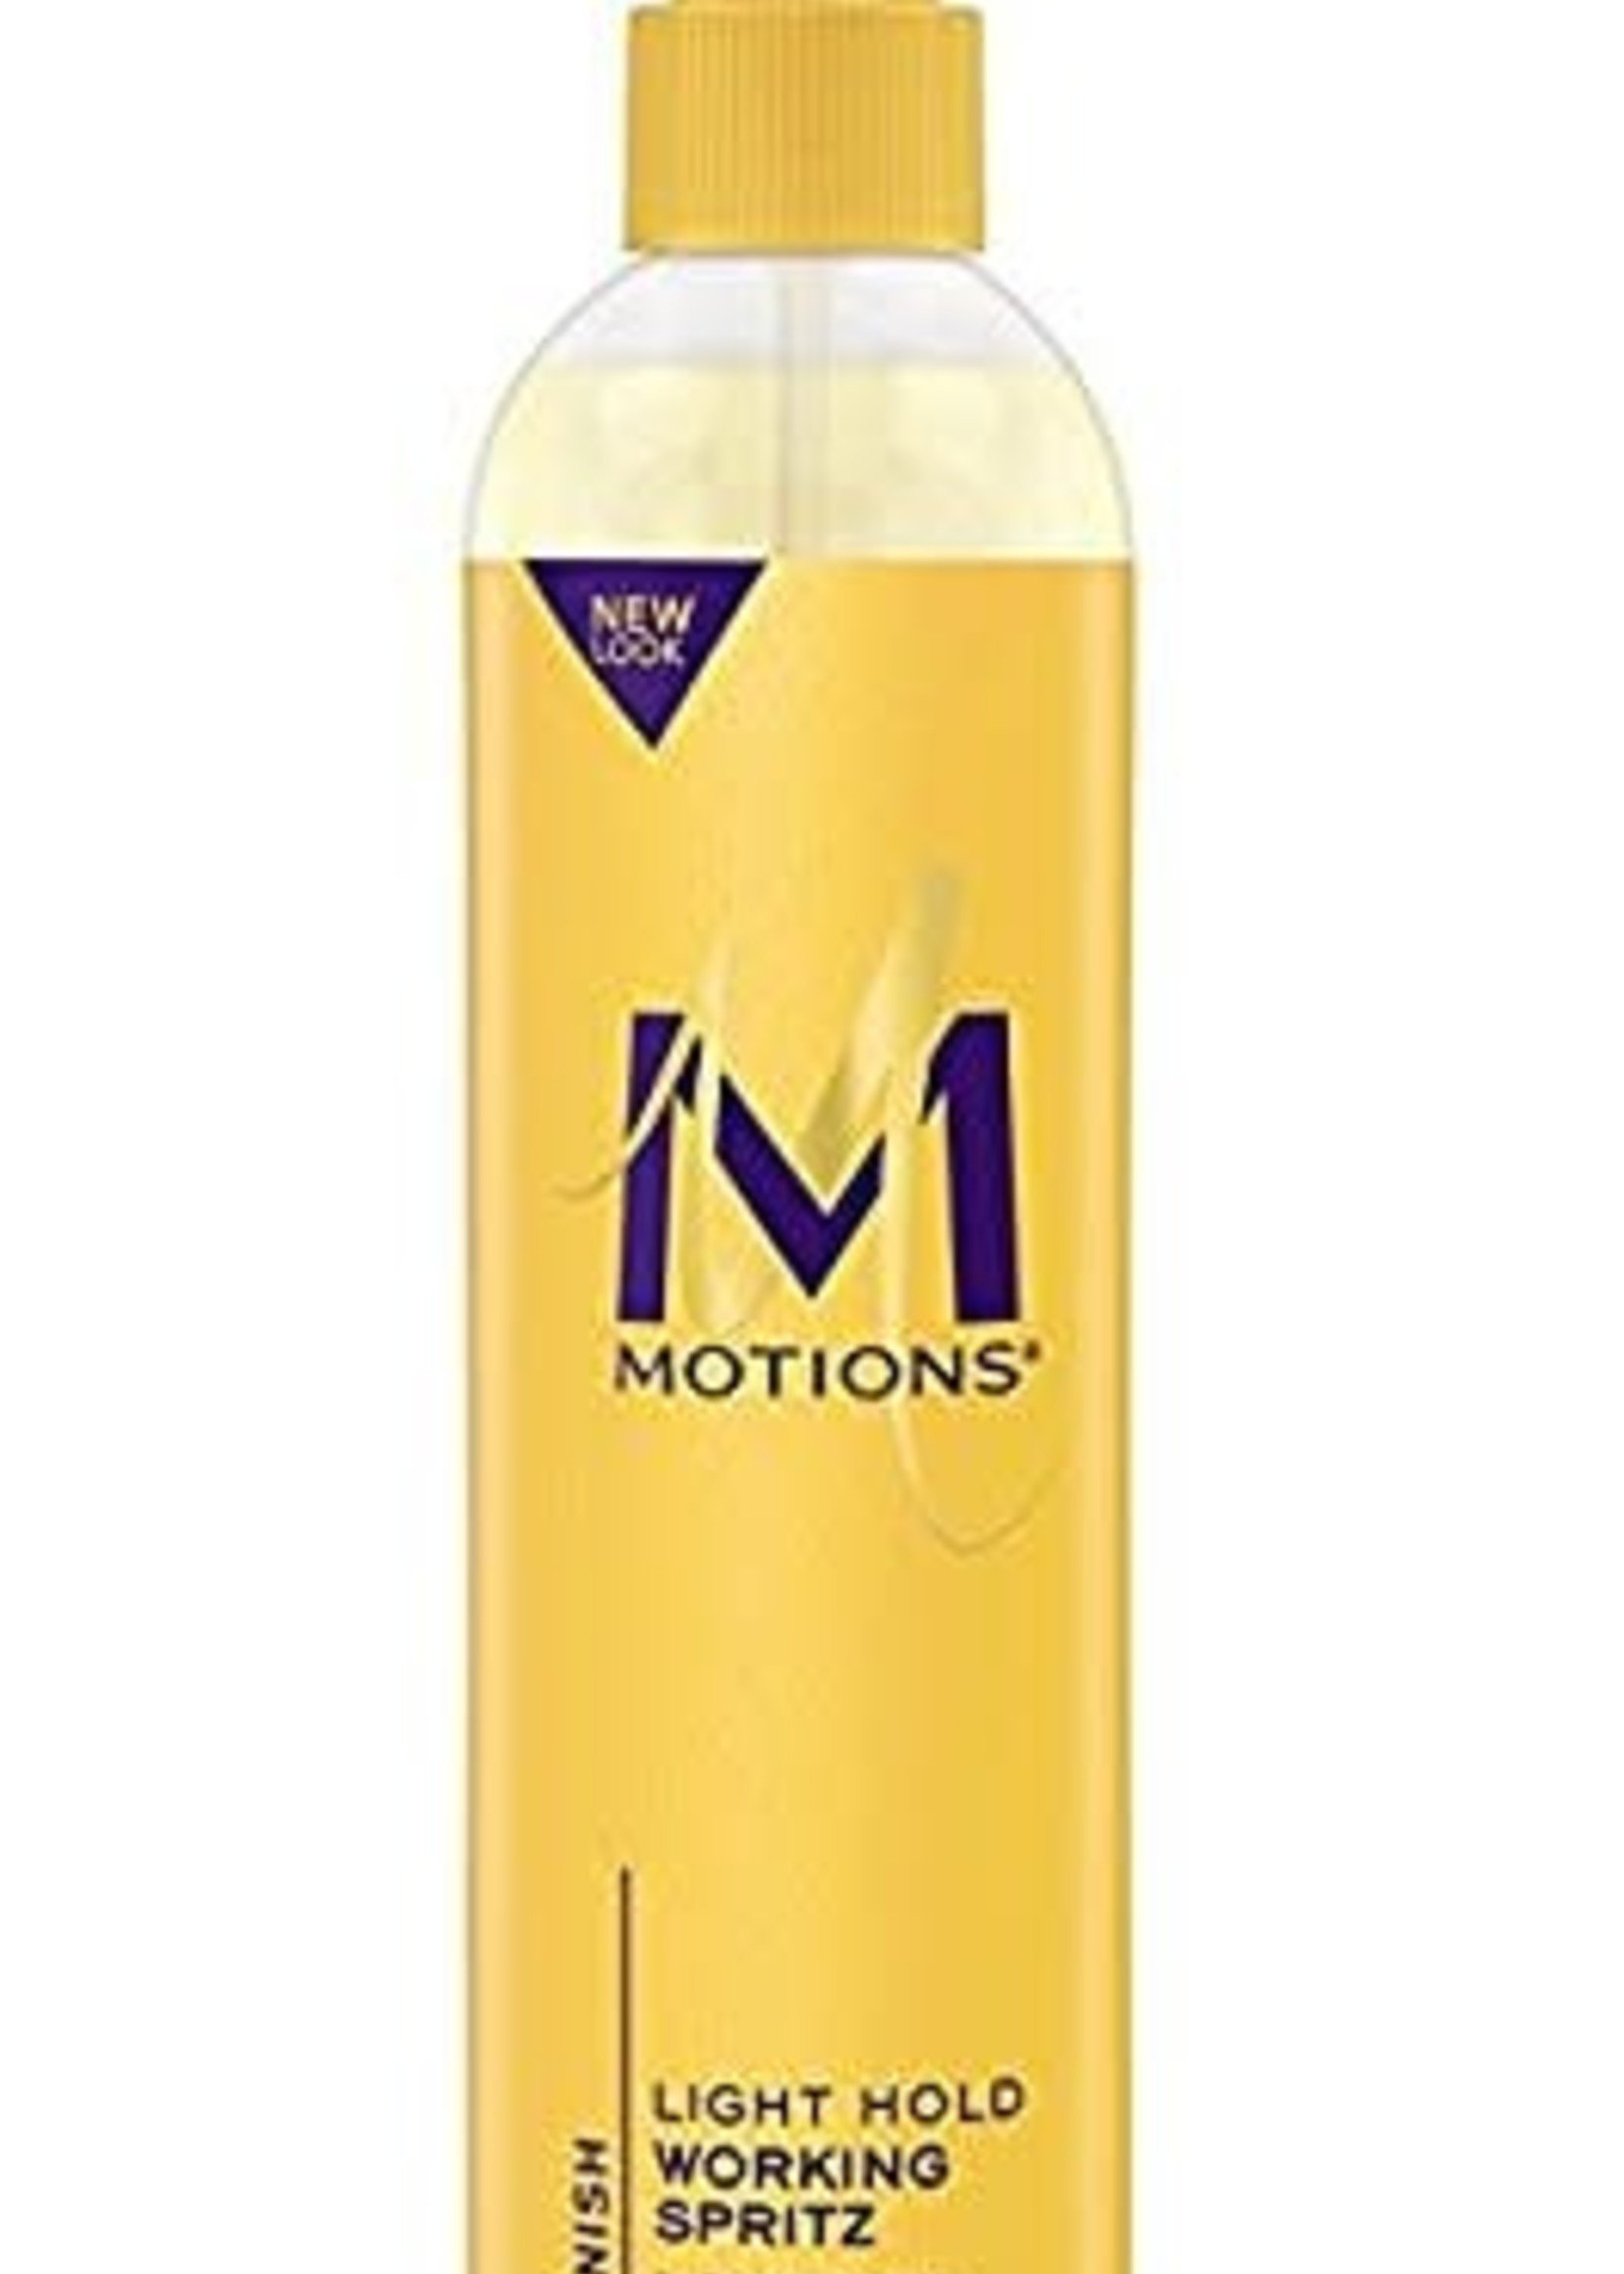 Motions Light Hold Working Spritz